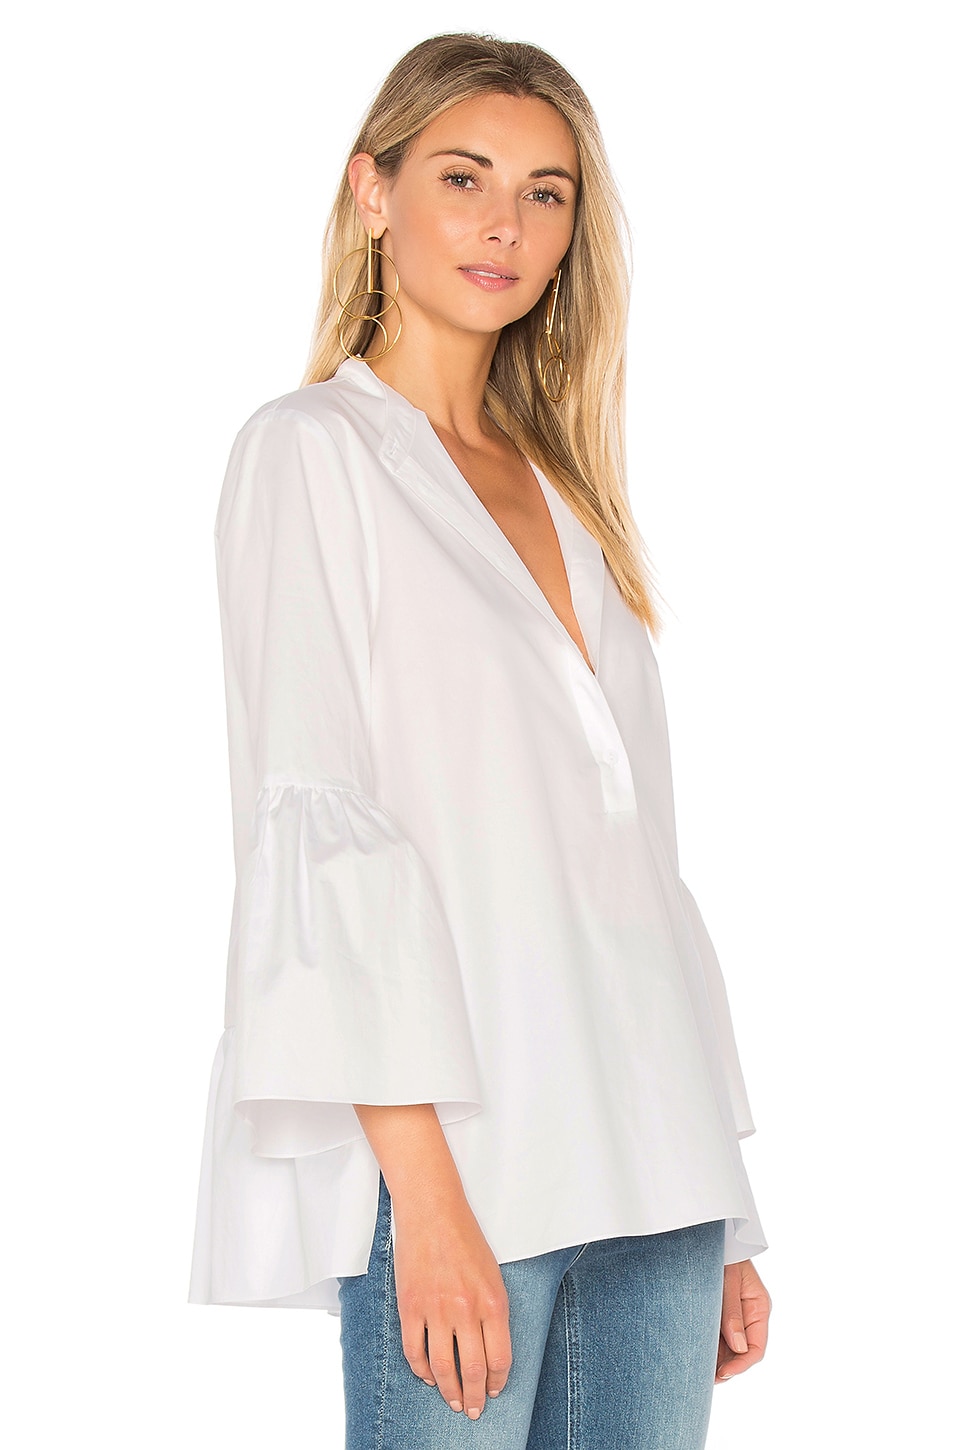 Tibi Tunic With Shirred Back & Bell Sleeve in White | REVOLVE